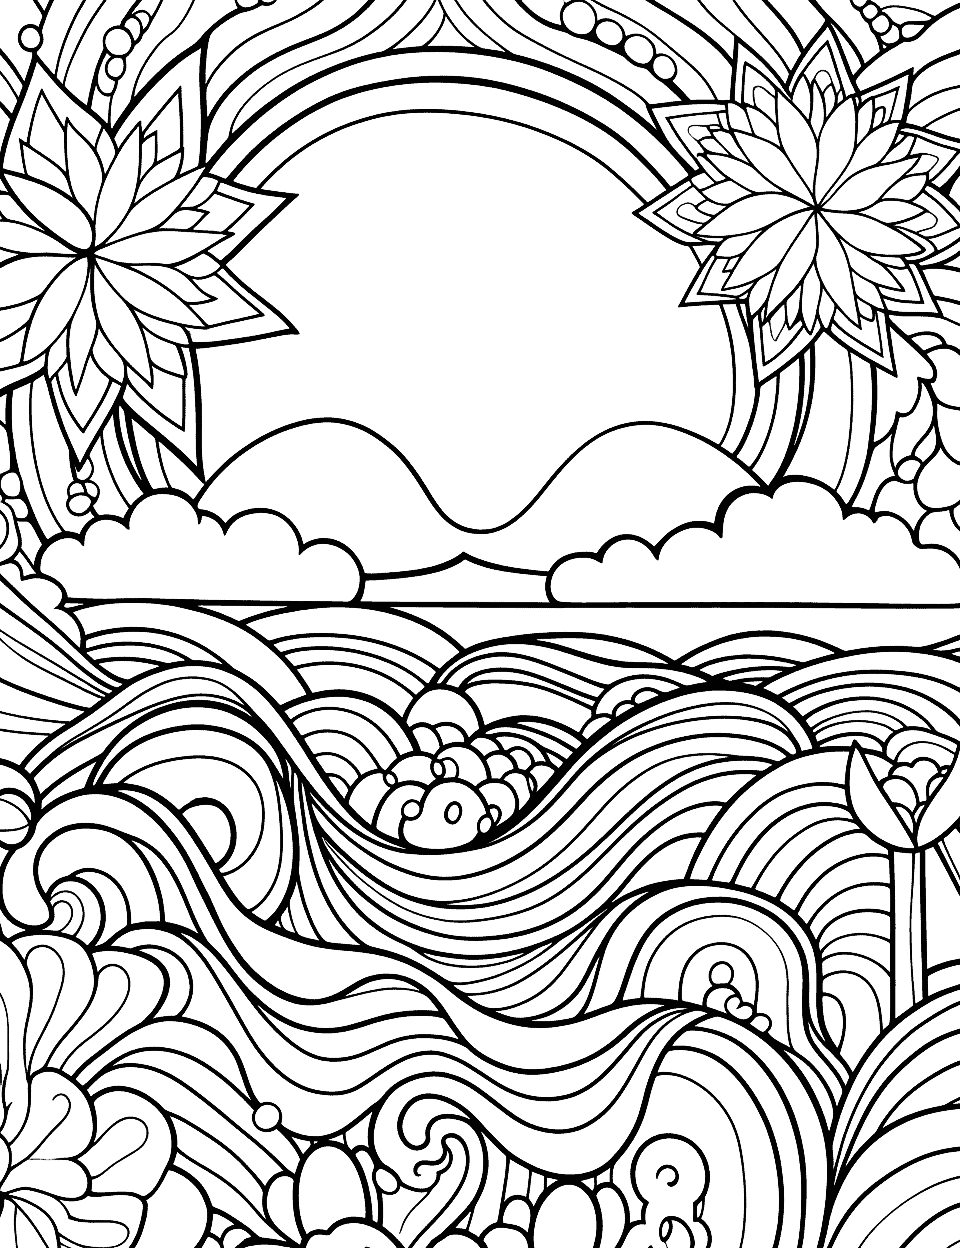 Trippy Summer Scene Adult Coloring Page - A summer beach scene transformed into a psychedelic visual extravaganza with swirling colors and abstract shapes.